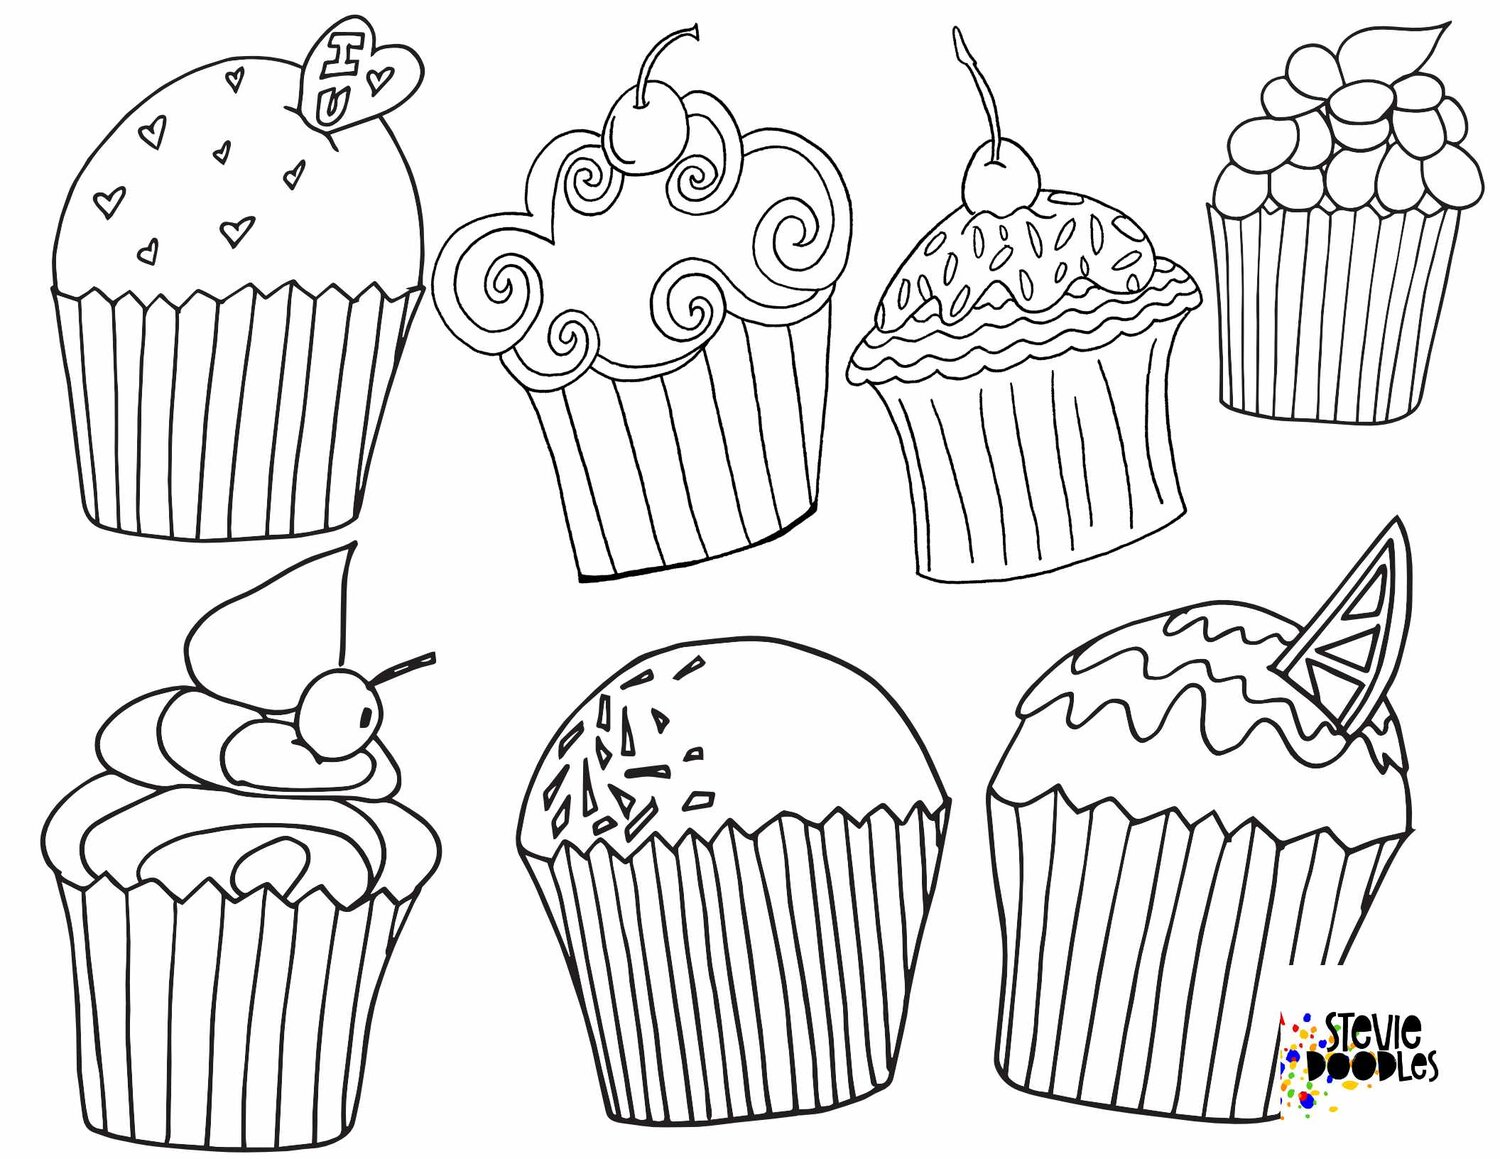 20 Free Cupcake Coloring Pages — Stevie Doodles Free Printable ...